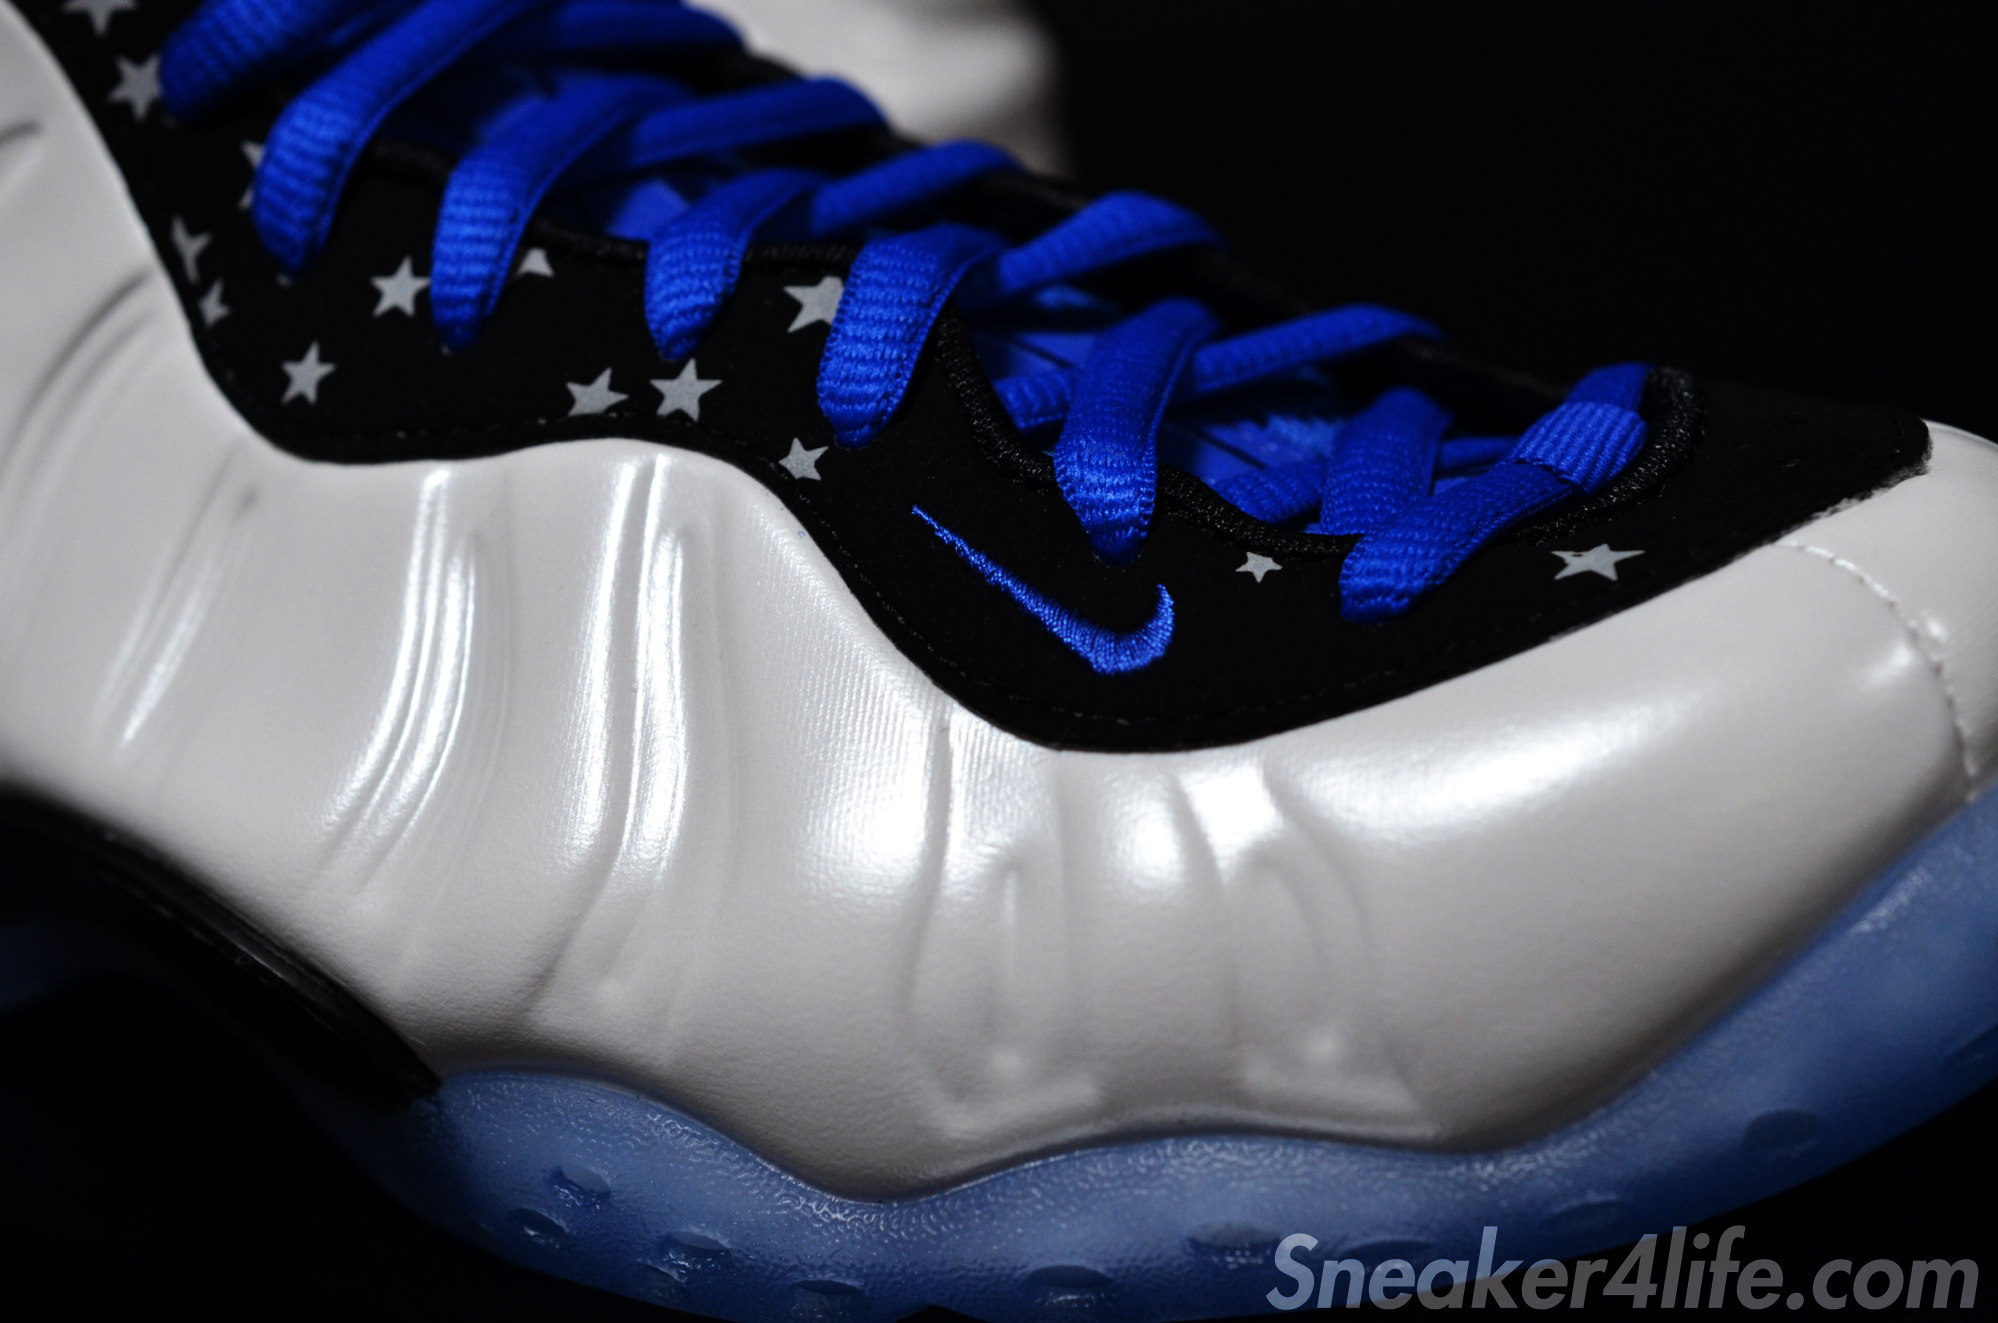 Gentry Confirms “Shooting Stars” Nike Air Foamposite One Release